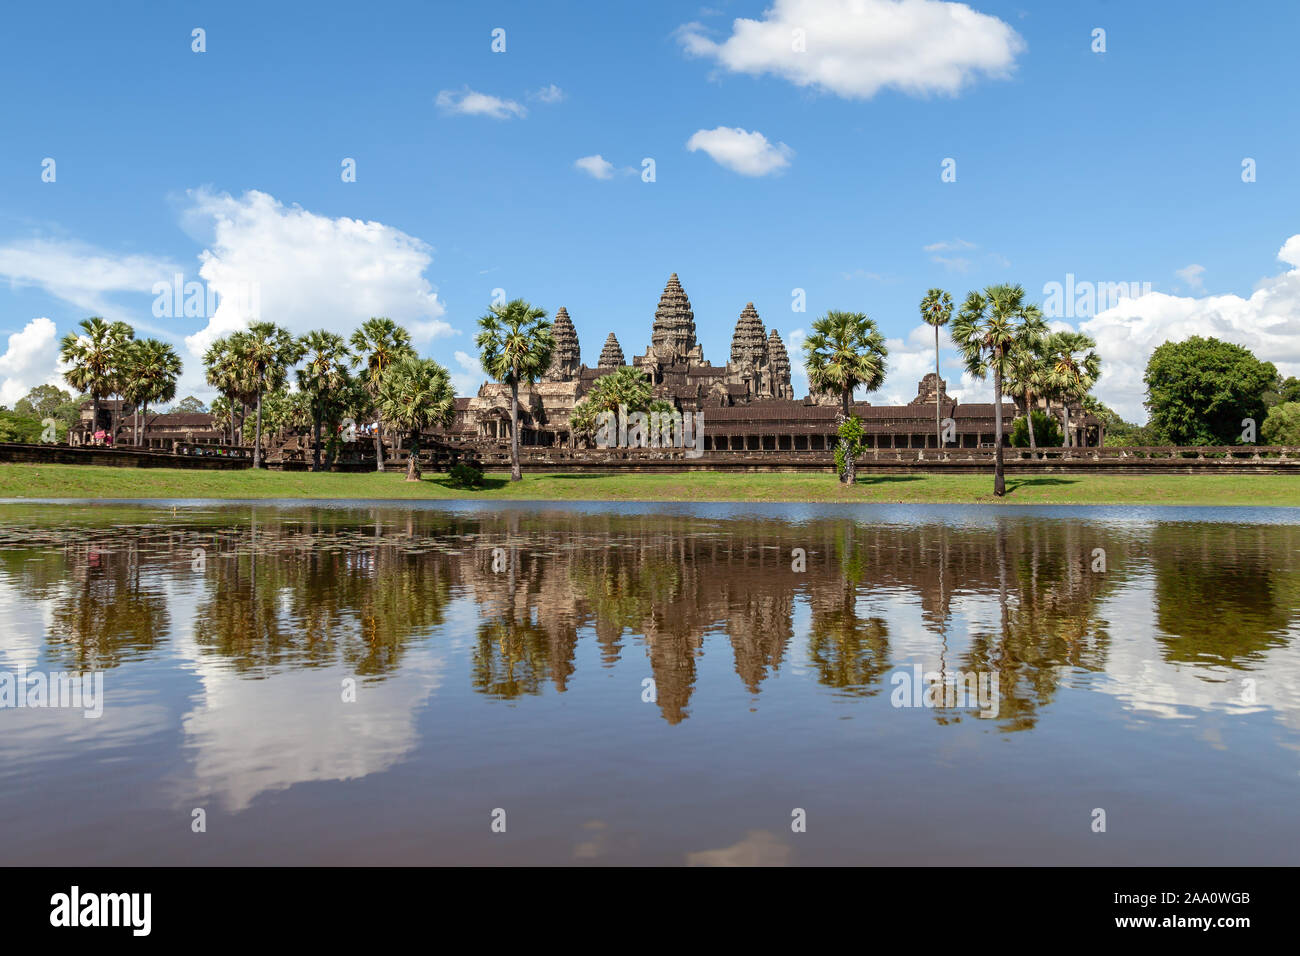 Angkor Wat and its reflection in the front lake. The blue sky is scattered with some fluffy white clouds. Everything is fresh and green in rainy seaso Stock Photo